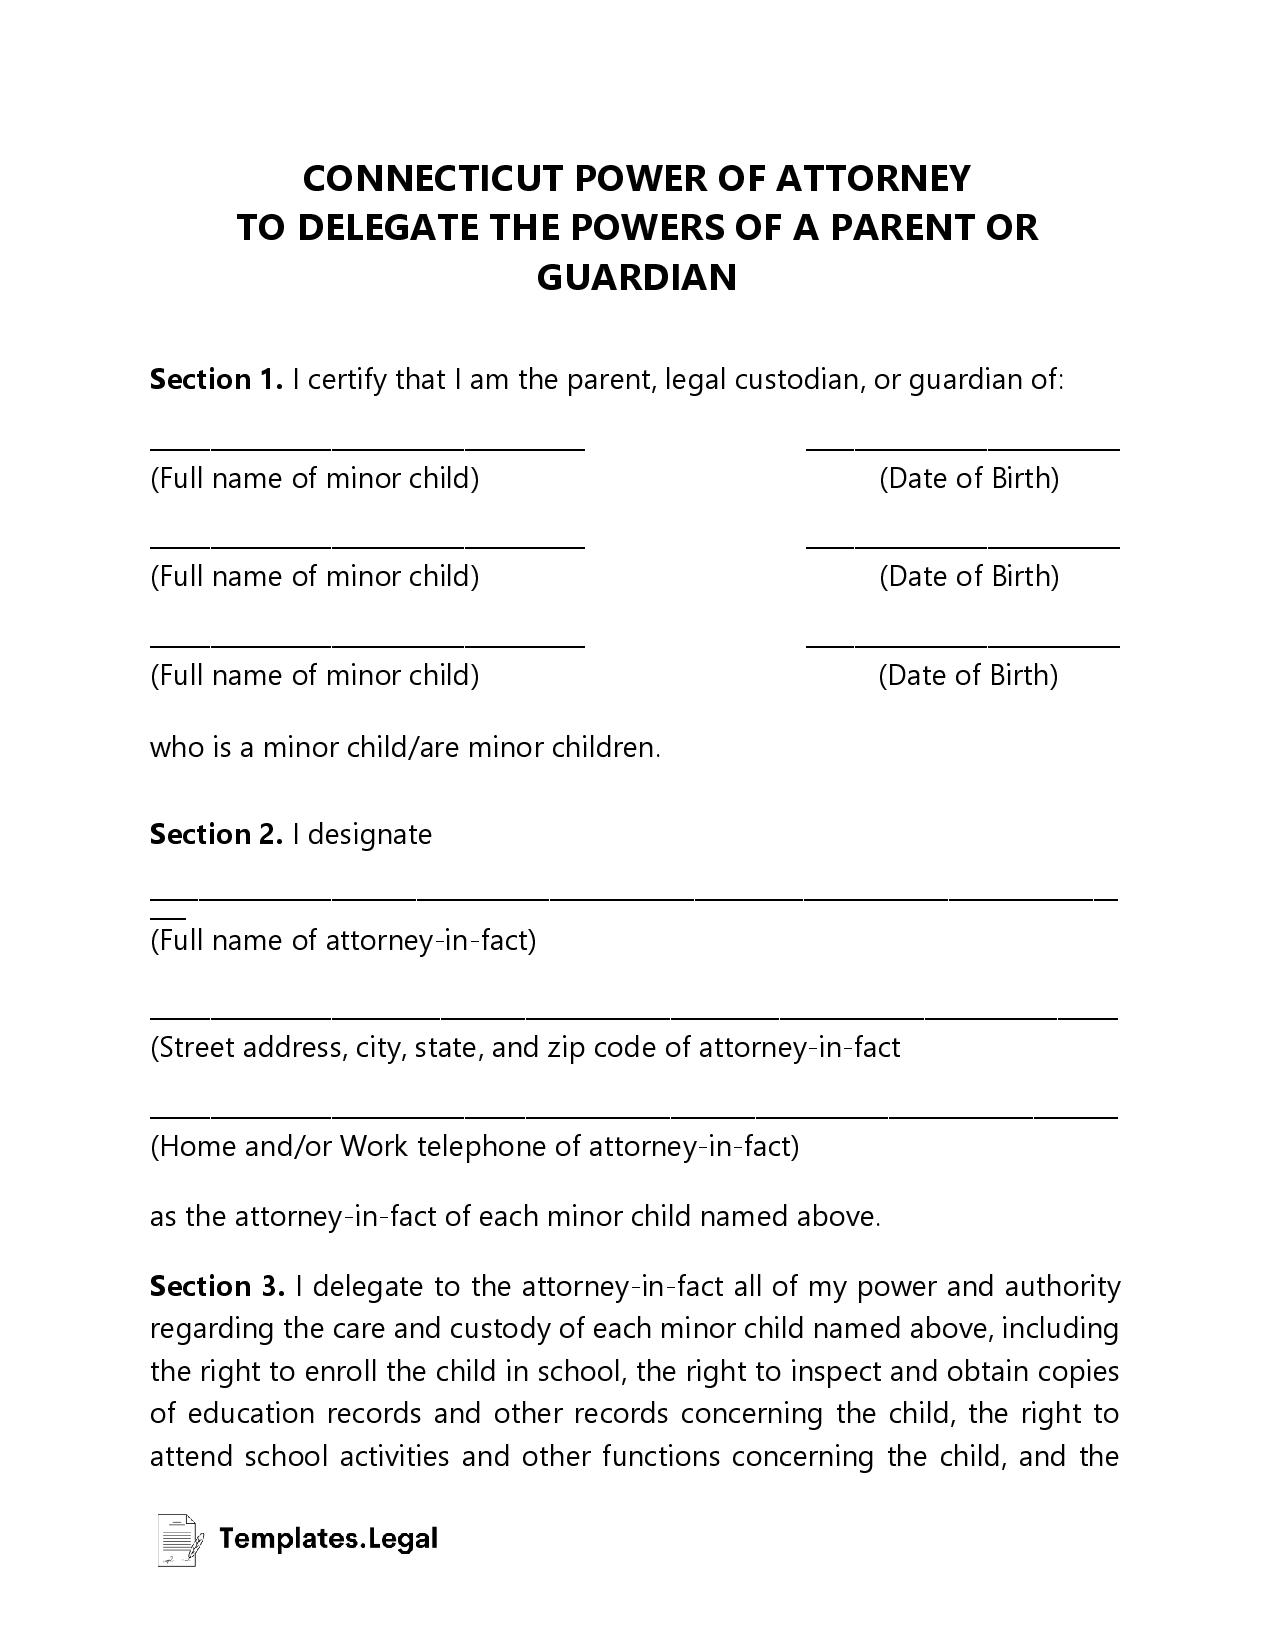 Connecticut Minor (Child) Power of Attorney - Templates.Legal